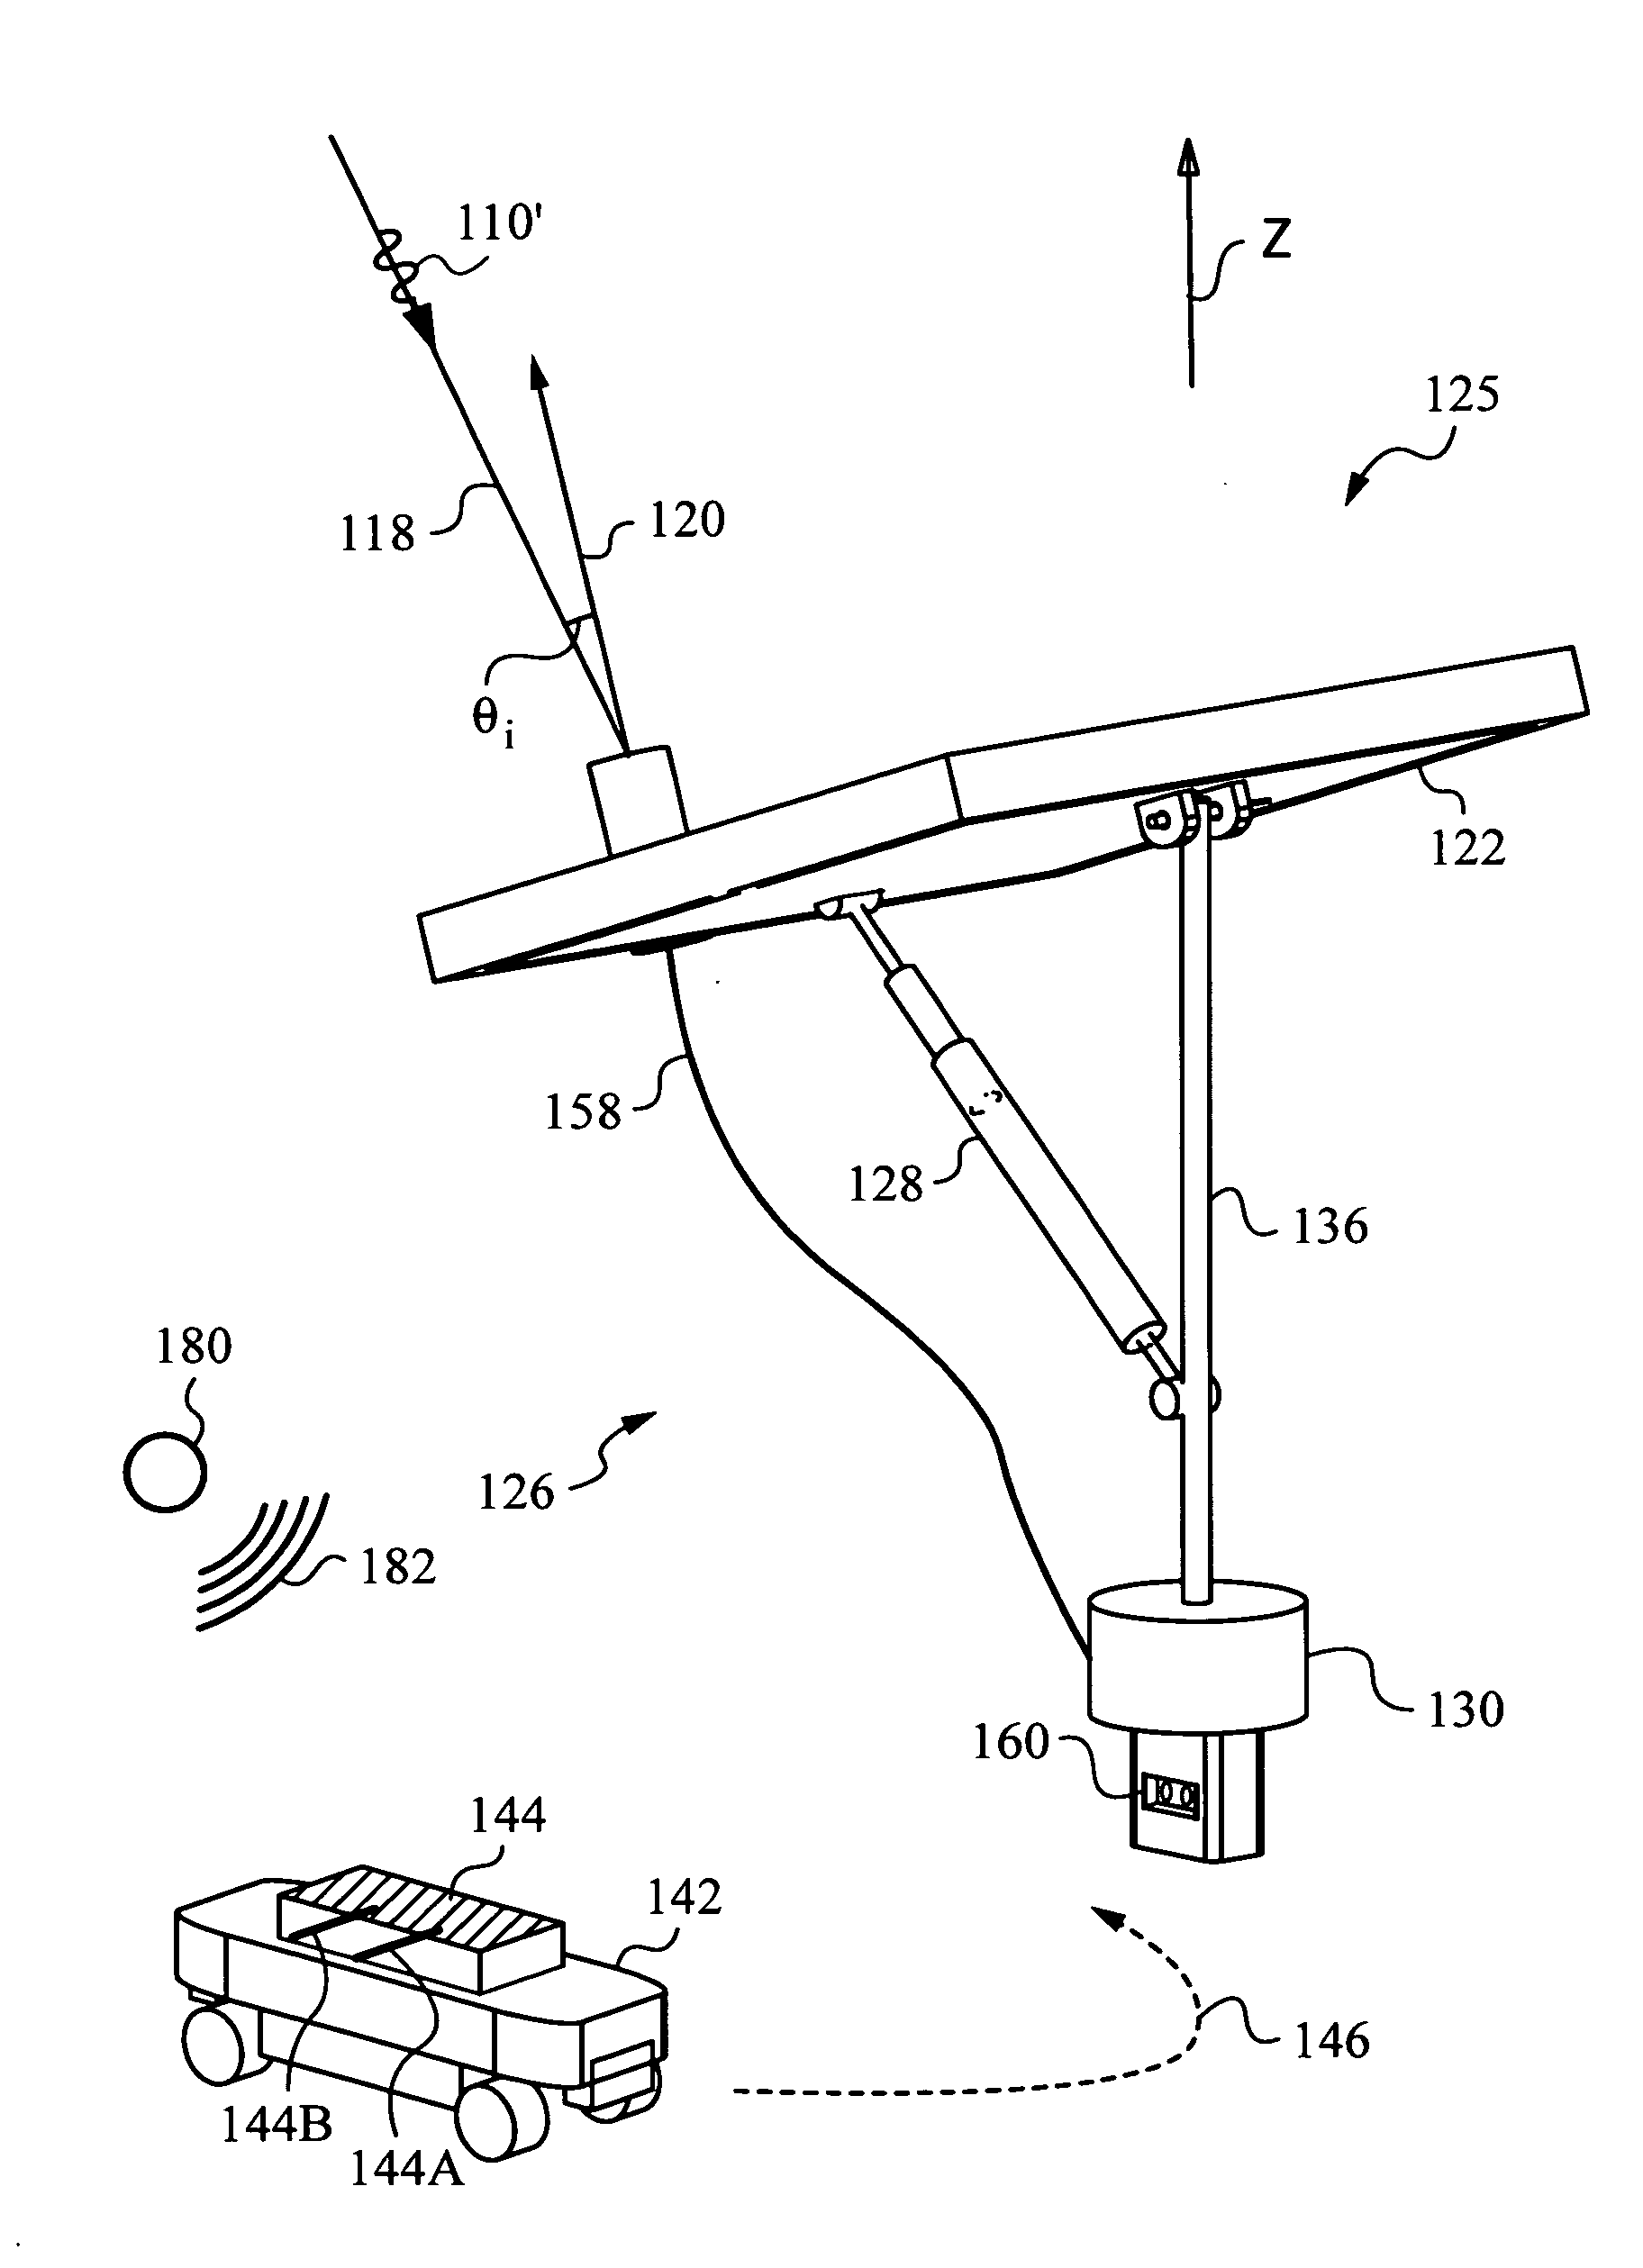 Solar tracking system using peridic scan patterns with a shielding tube